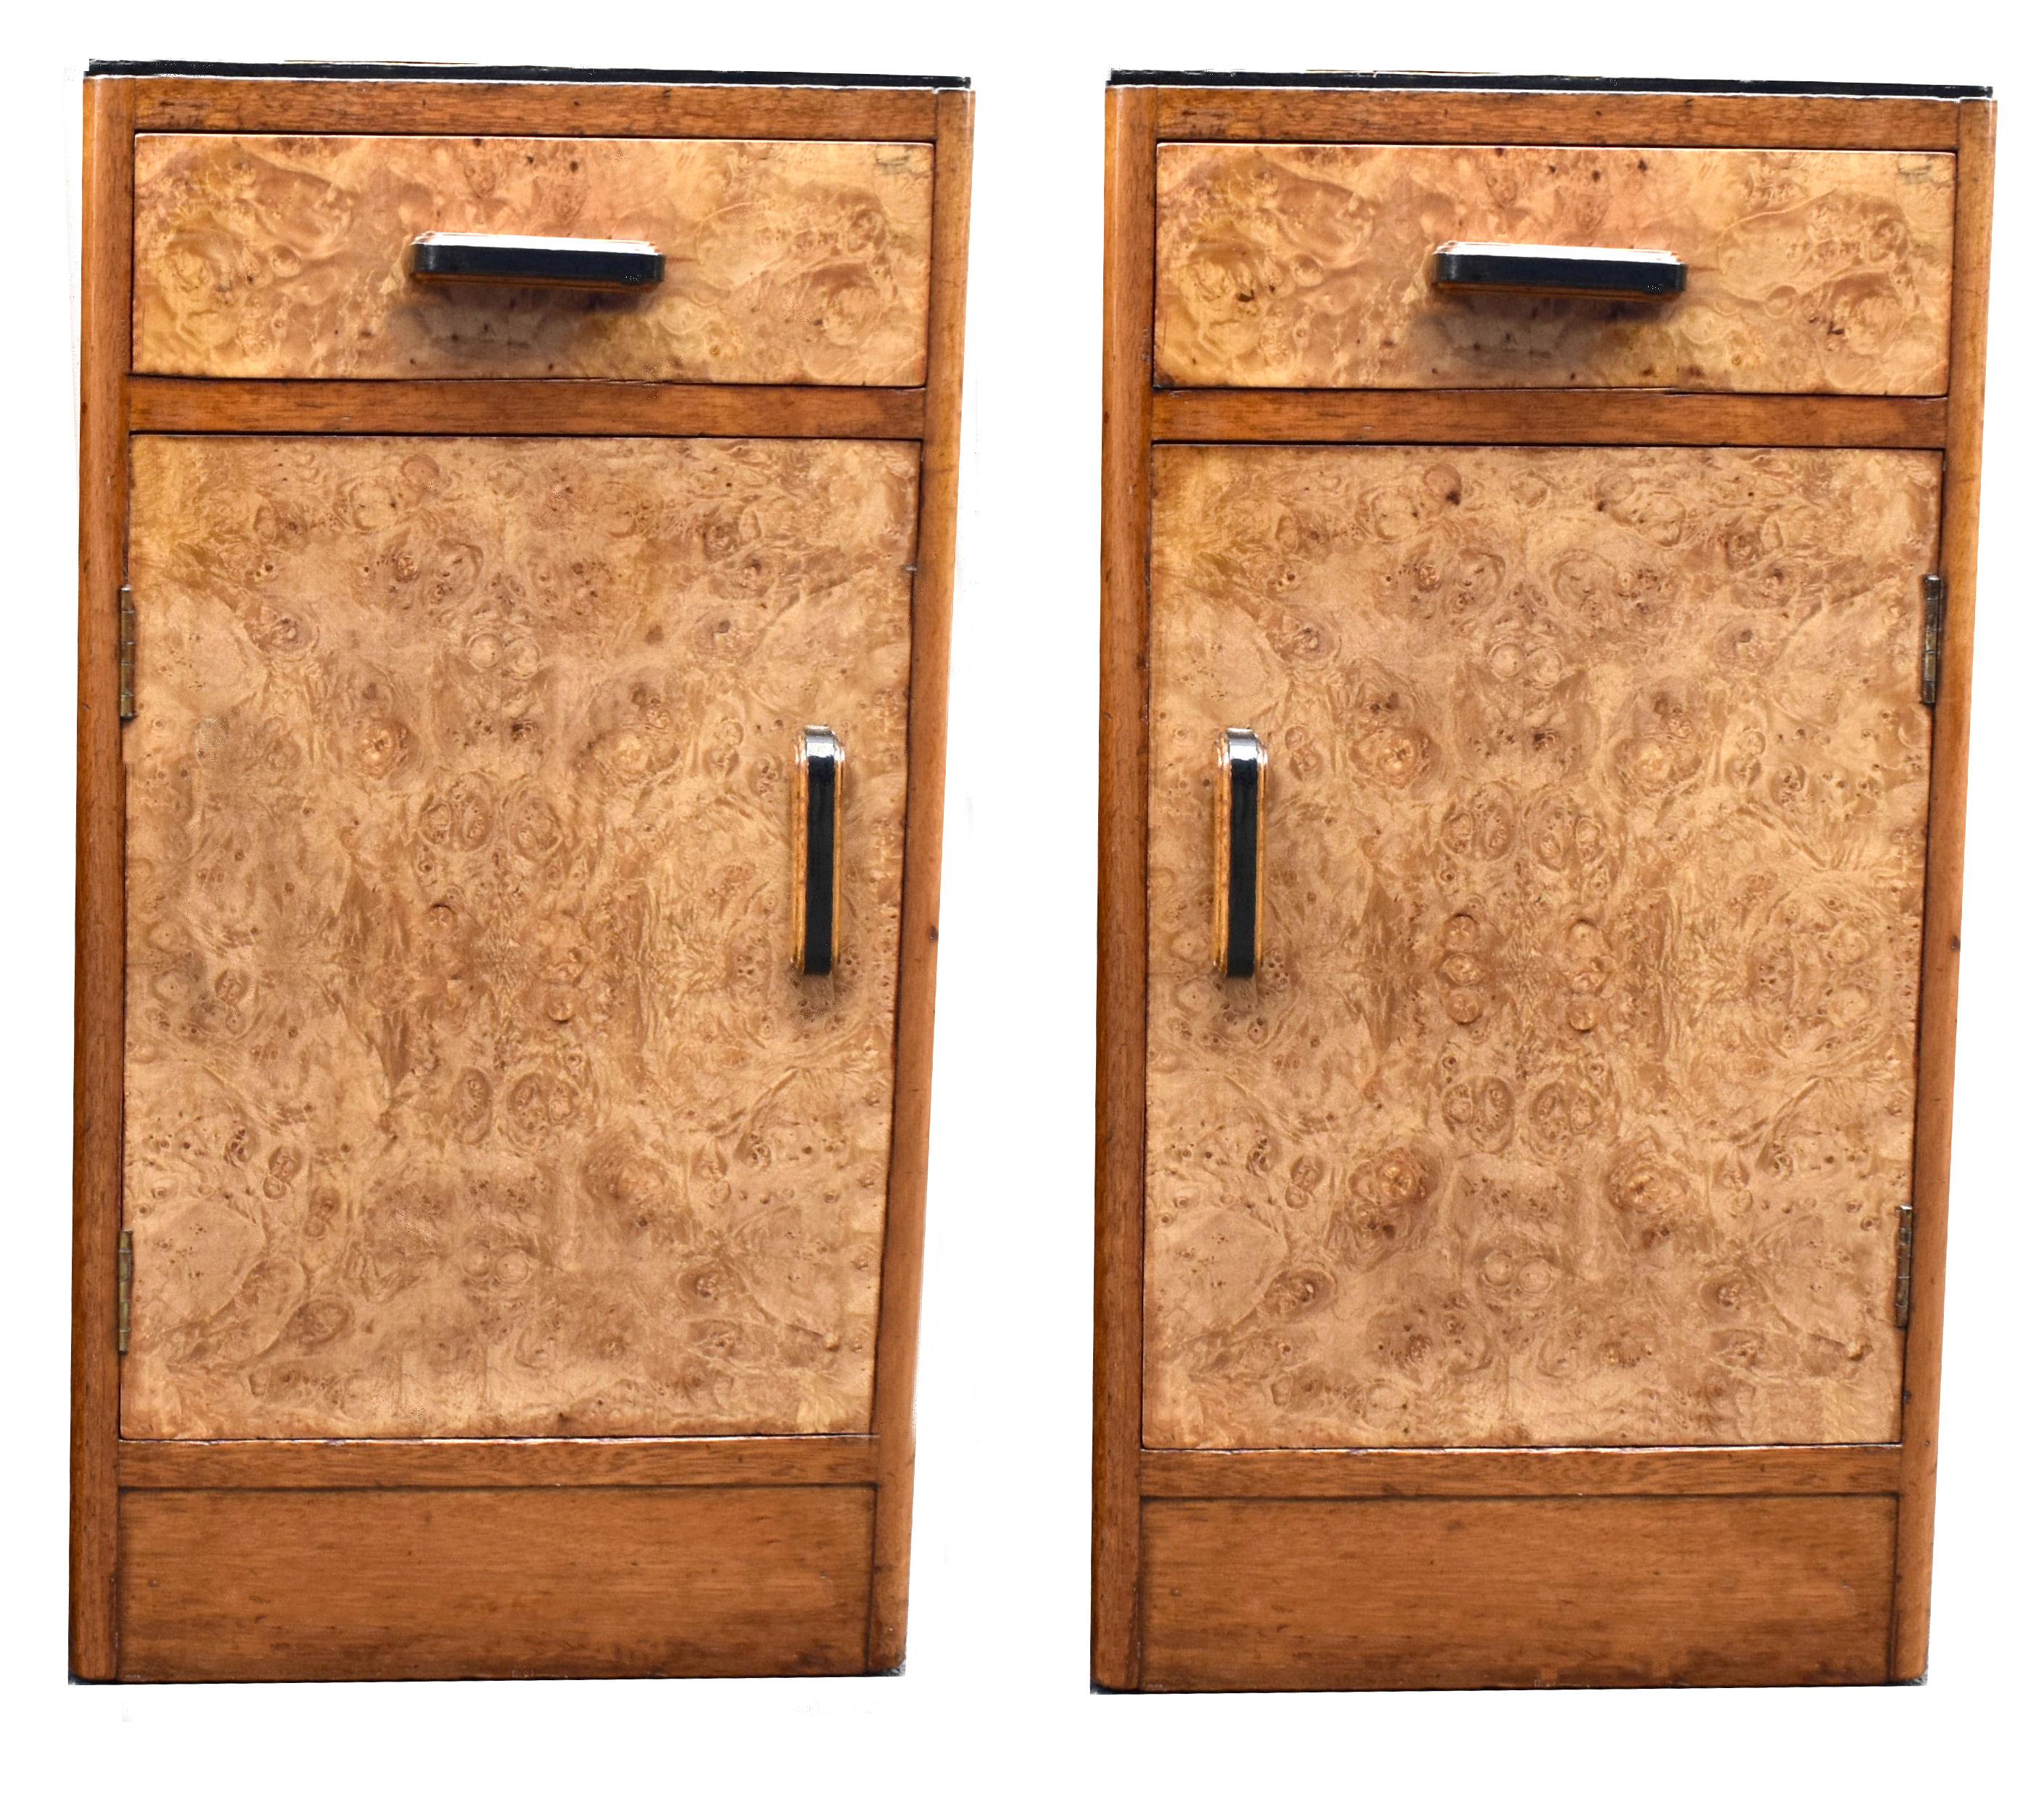 Walnut Art Deco Pair of Blonde Maple Bedroom Bedside Cabinets, Night Stands, c1930 For Sale